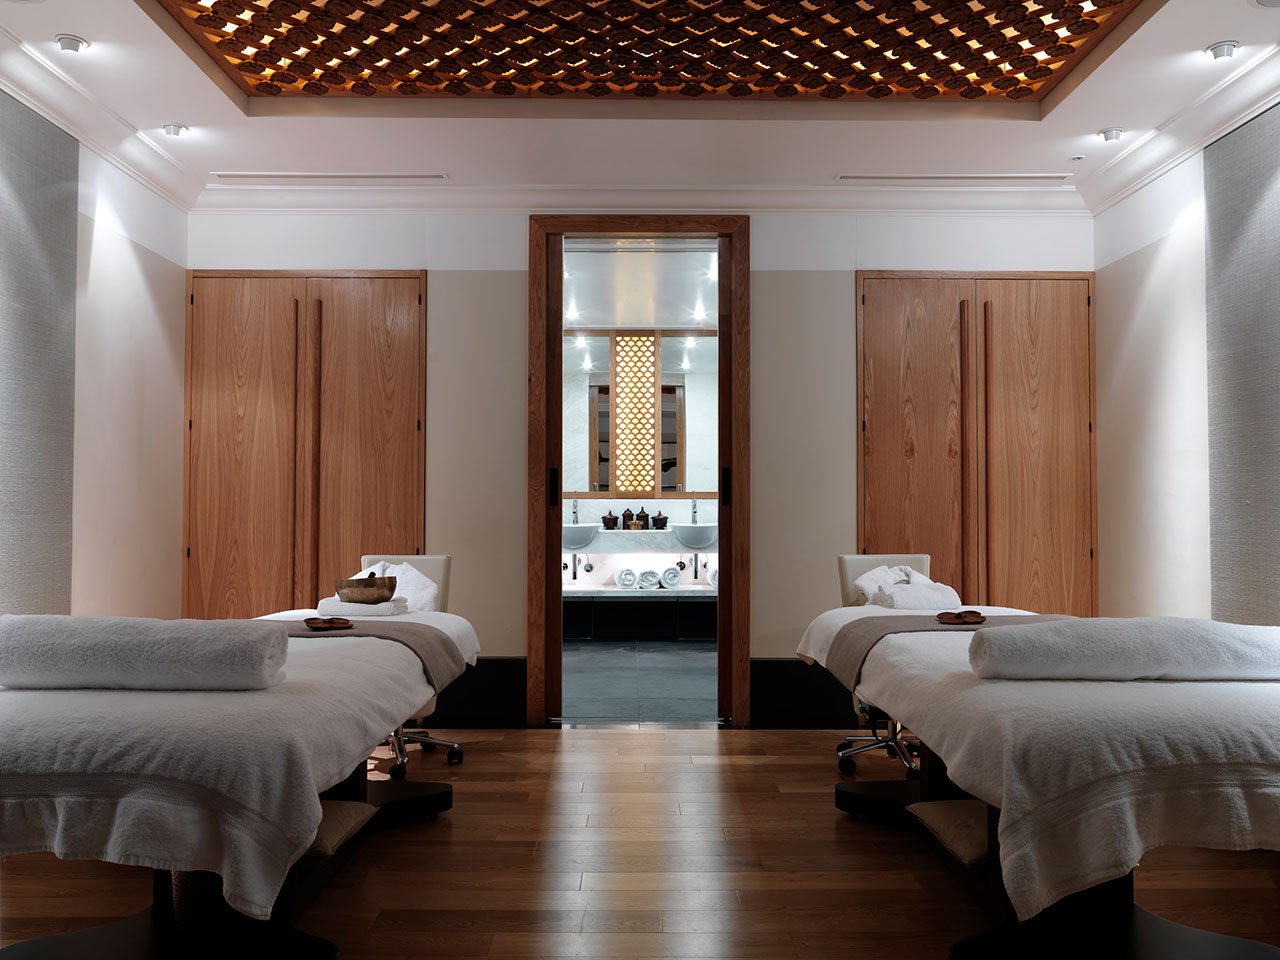 Spa treatment room with wooden lattice ceiling, two beds and wooden wardrobes and floors